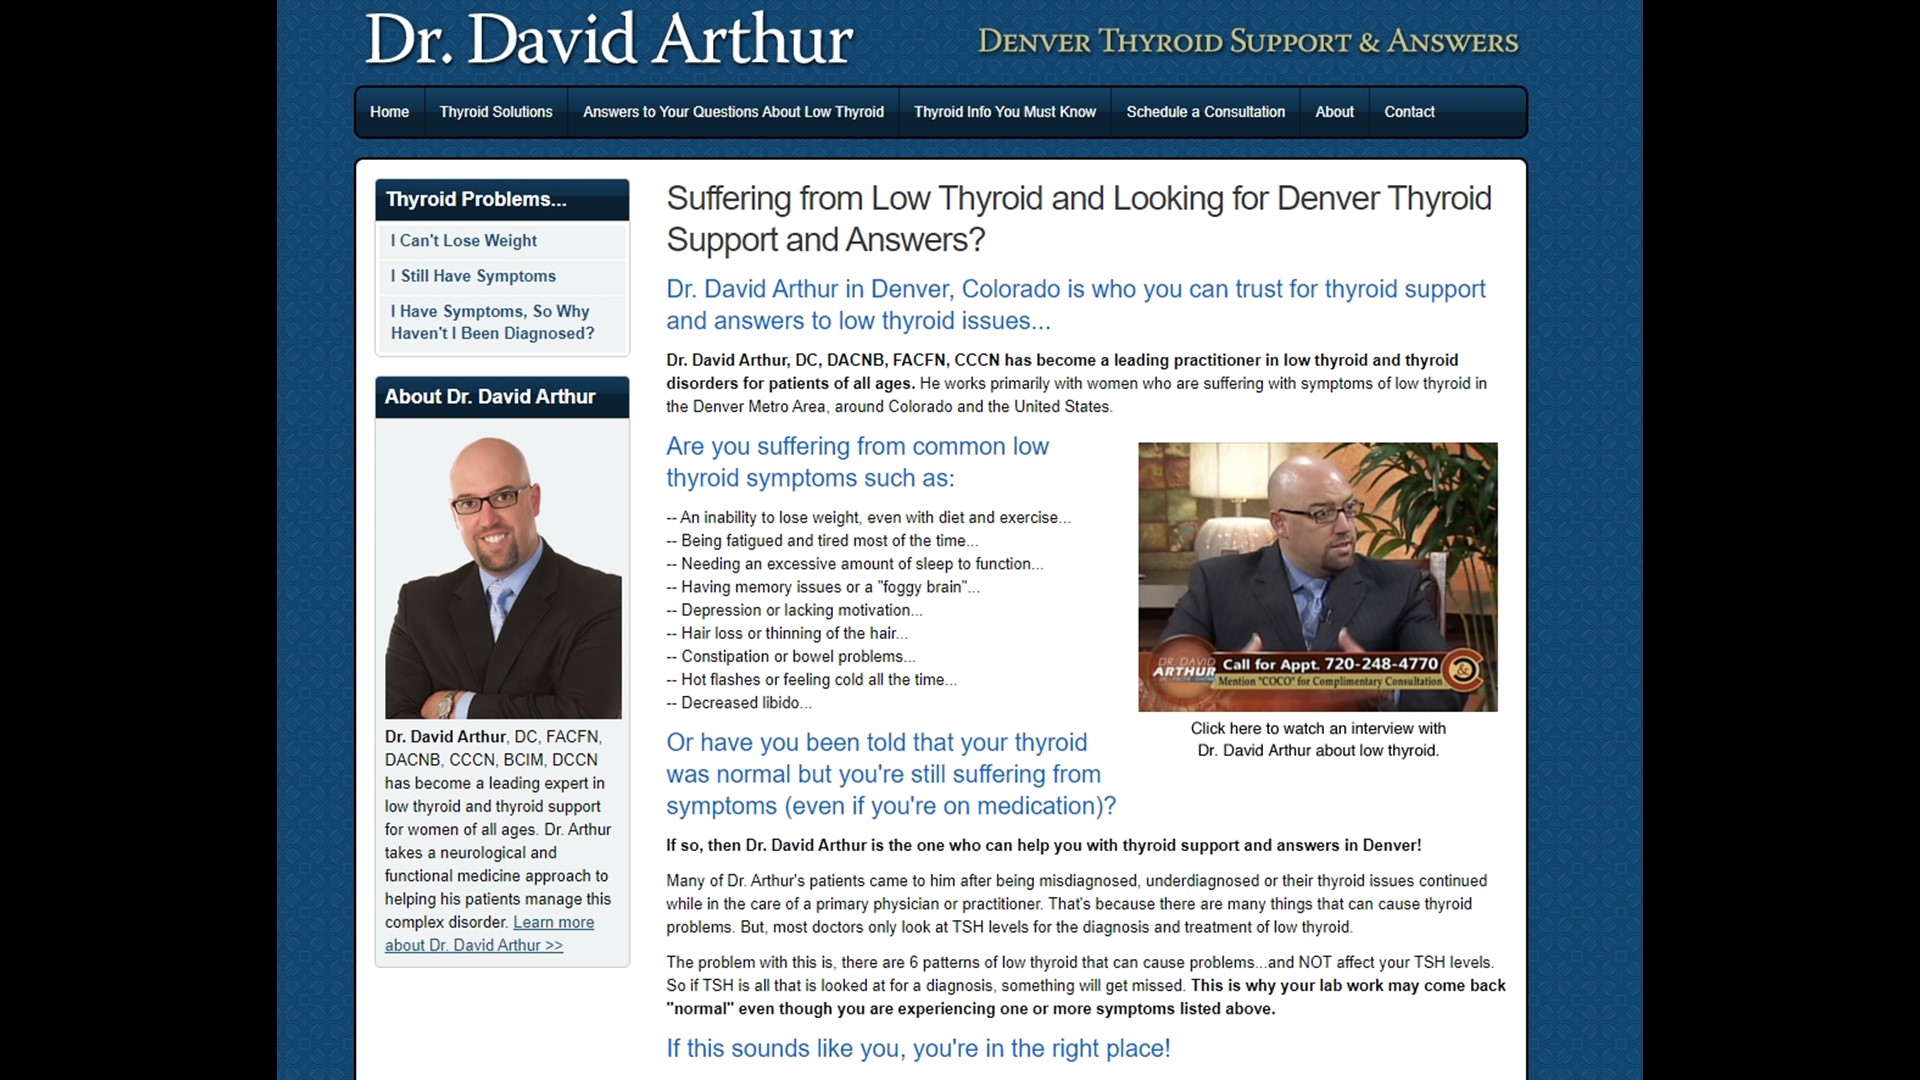 Call Dr. Arthur at 720.248.4770 to get started. The first 20 callers will get a free initial consultation. Learn more at DenverThyroidSupport.com. **PAID CONTENT**